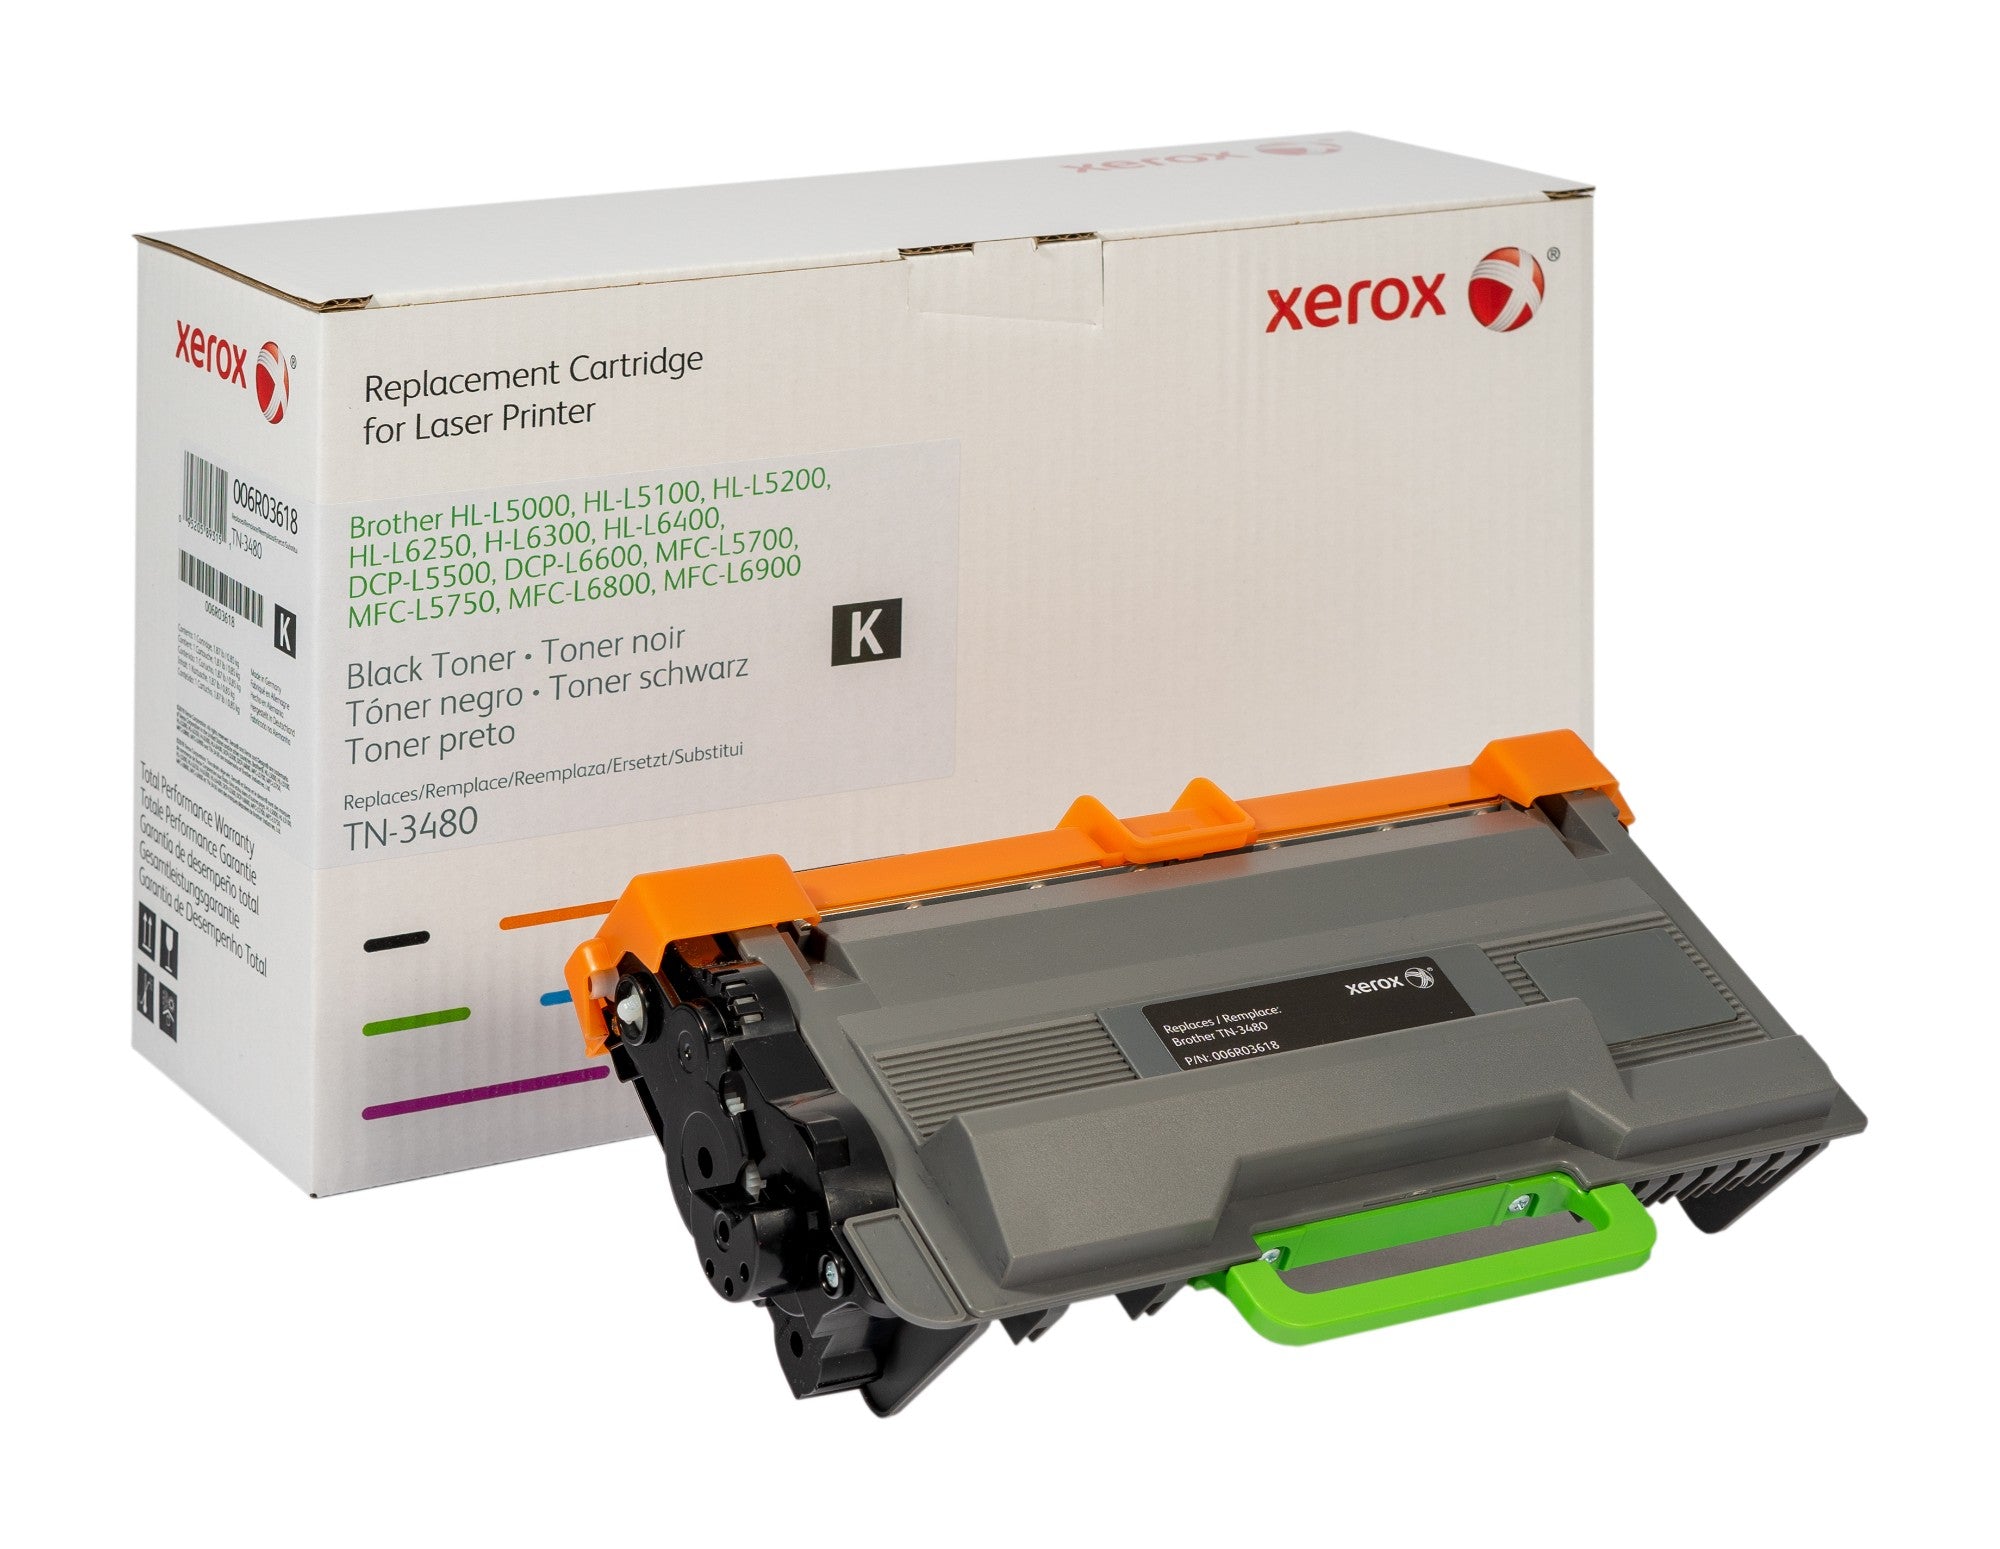 Xerox 006R03618 Toner-kit, 8K pages (replaces Brother TN3480) for Brother HL-L 5000/6250/6400